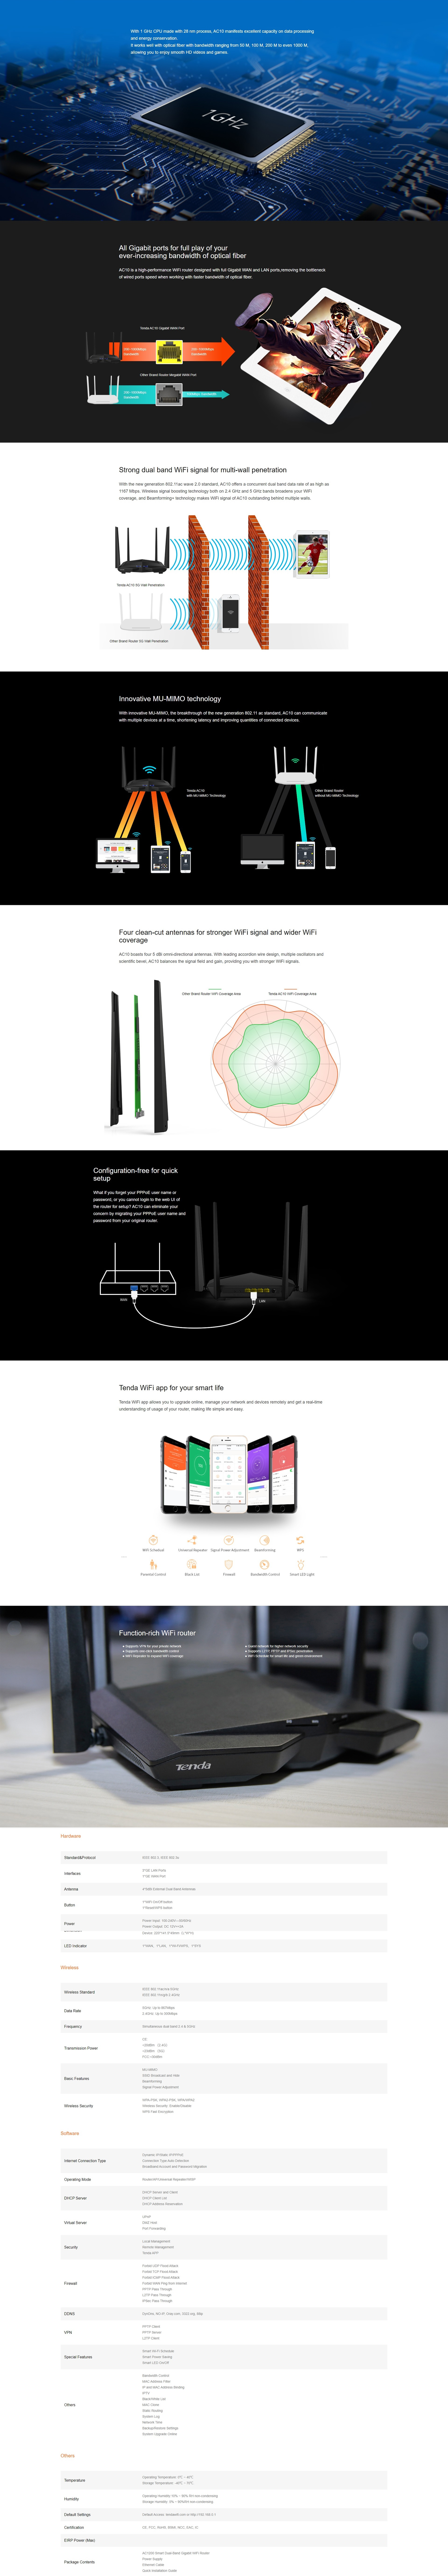 A large marketing image providing additional information about the product Tenda AC10 AC1200 Smart Dual-Band Wireless Router - Additional alt info not provided